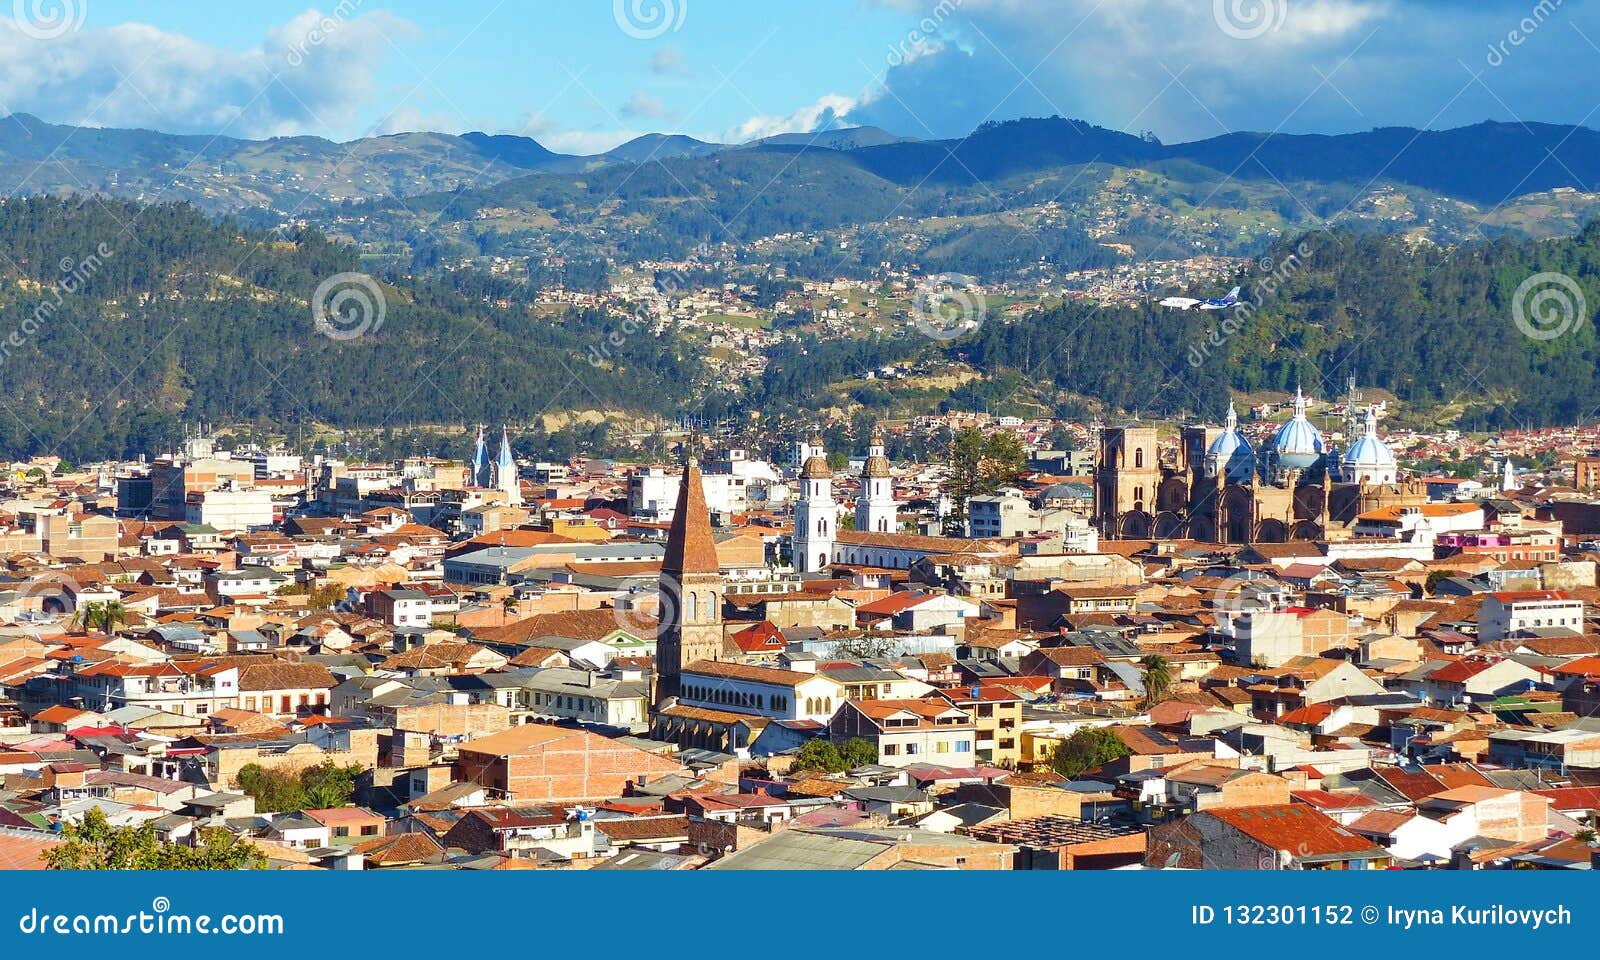 panoramic view of the city cuenca, ecuador, with many churches